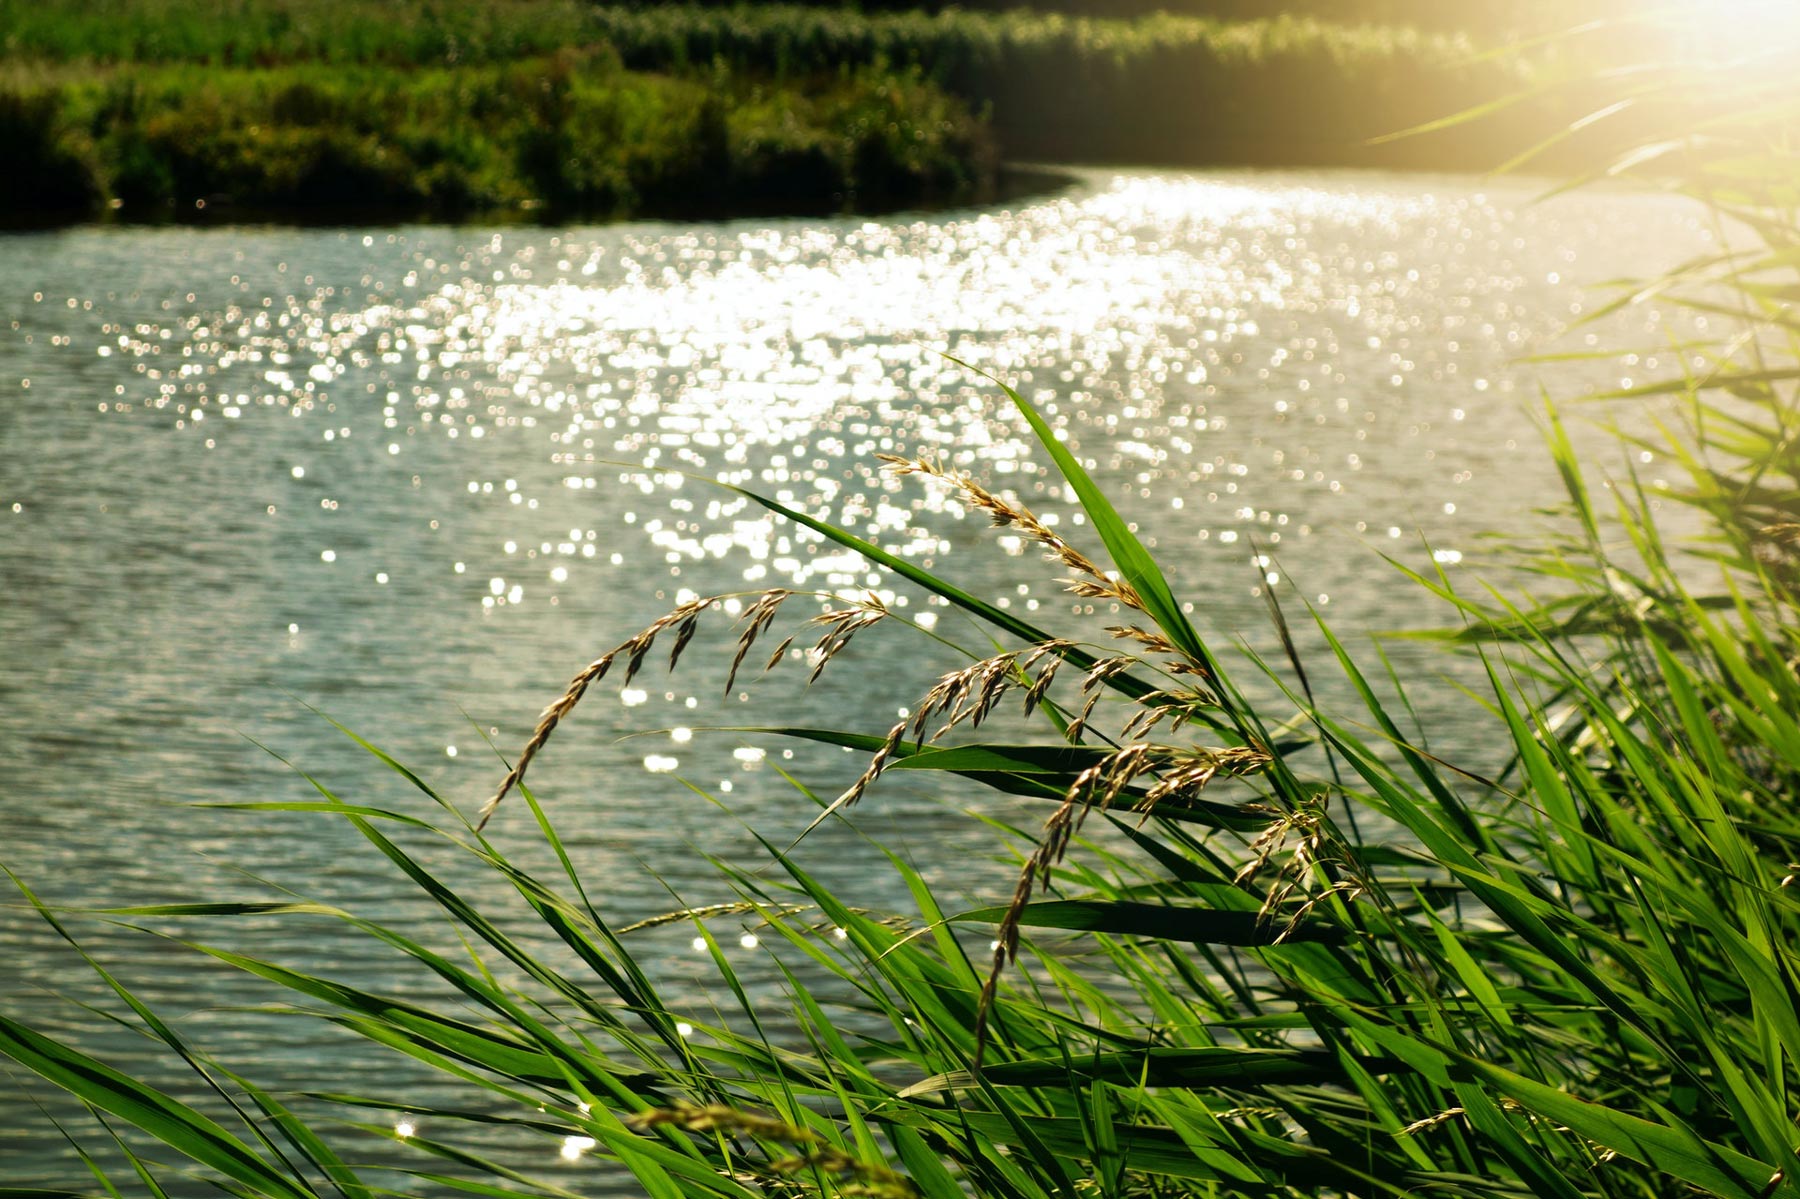 Image taken from a riverbank of a river, the vegetation around it with the sun setting